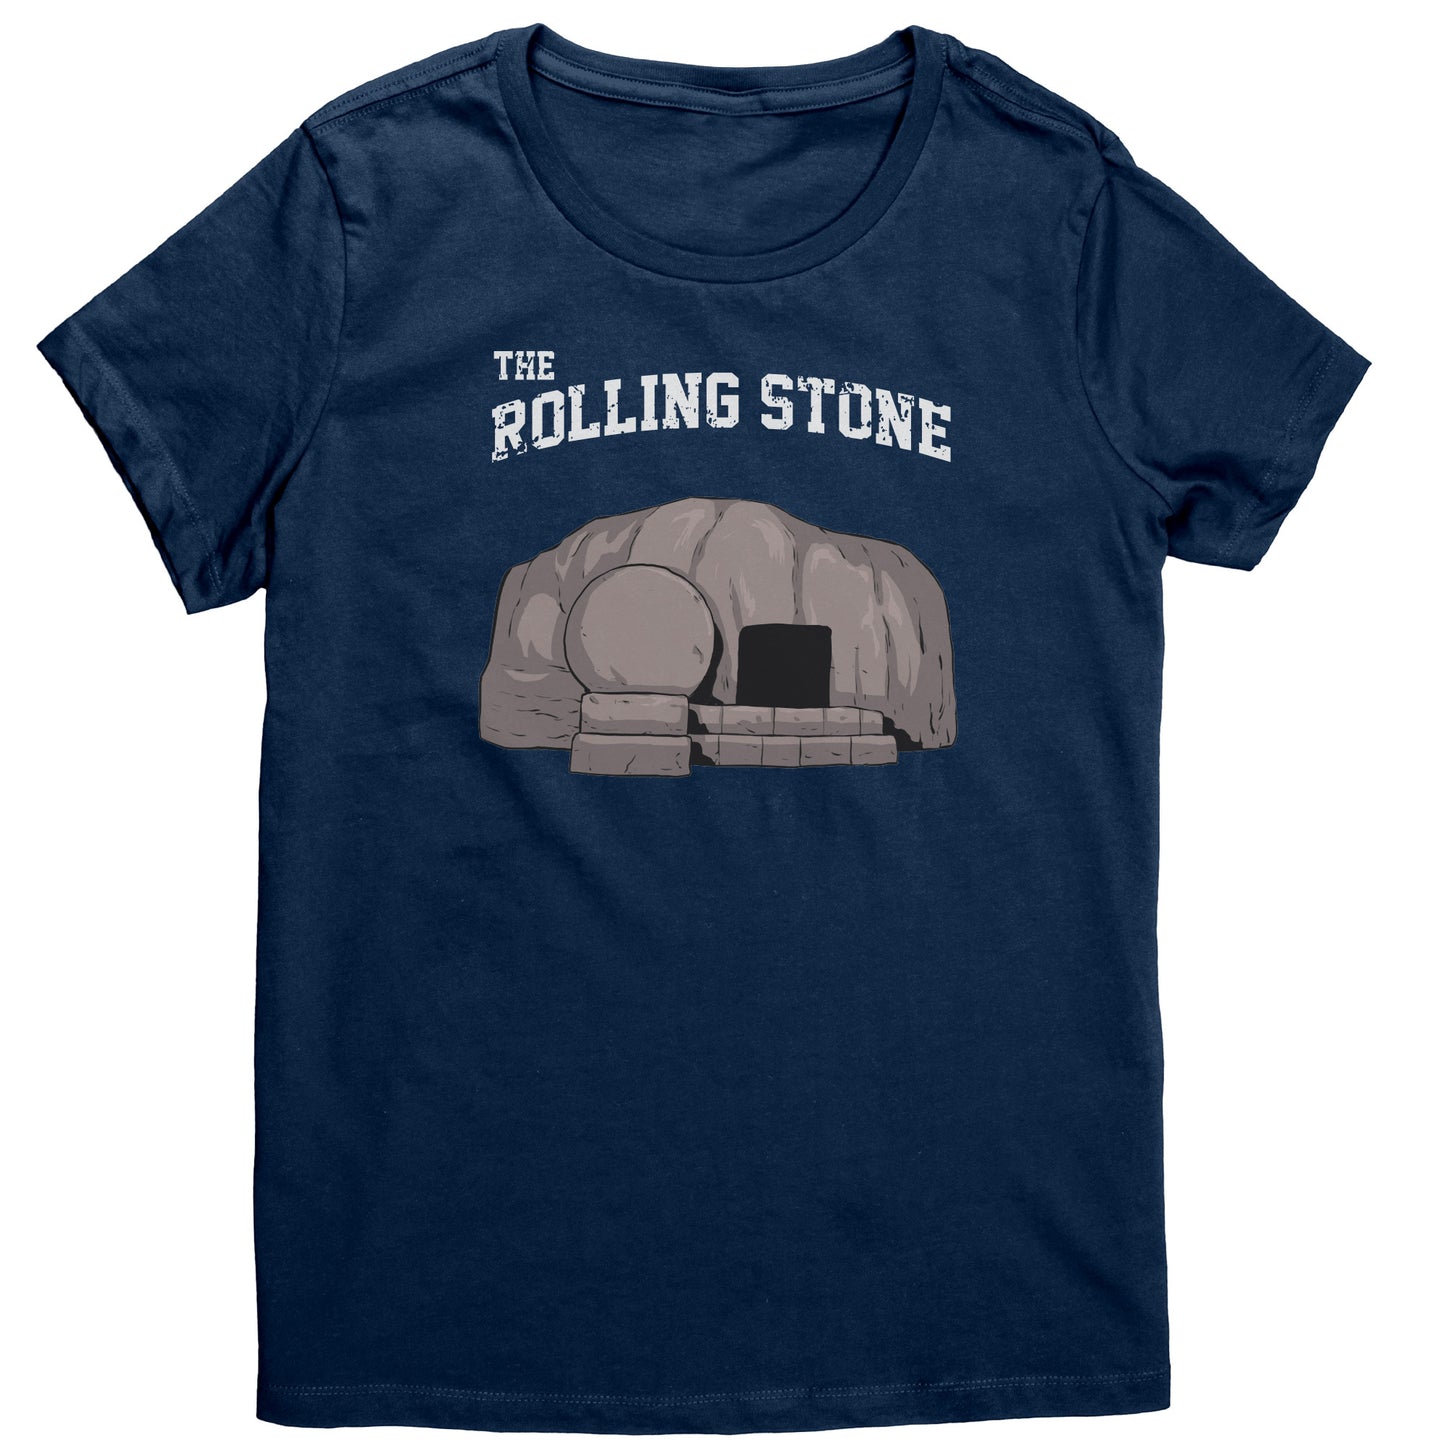 The Rolling Stone Women's T-Shirt Part 2